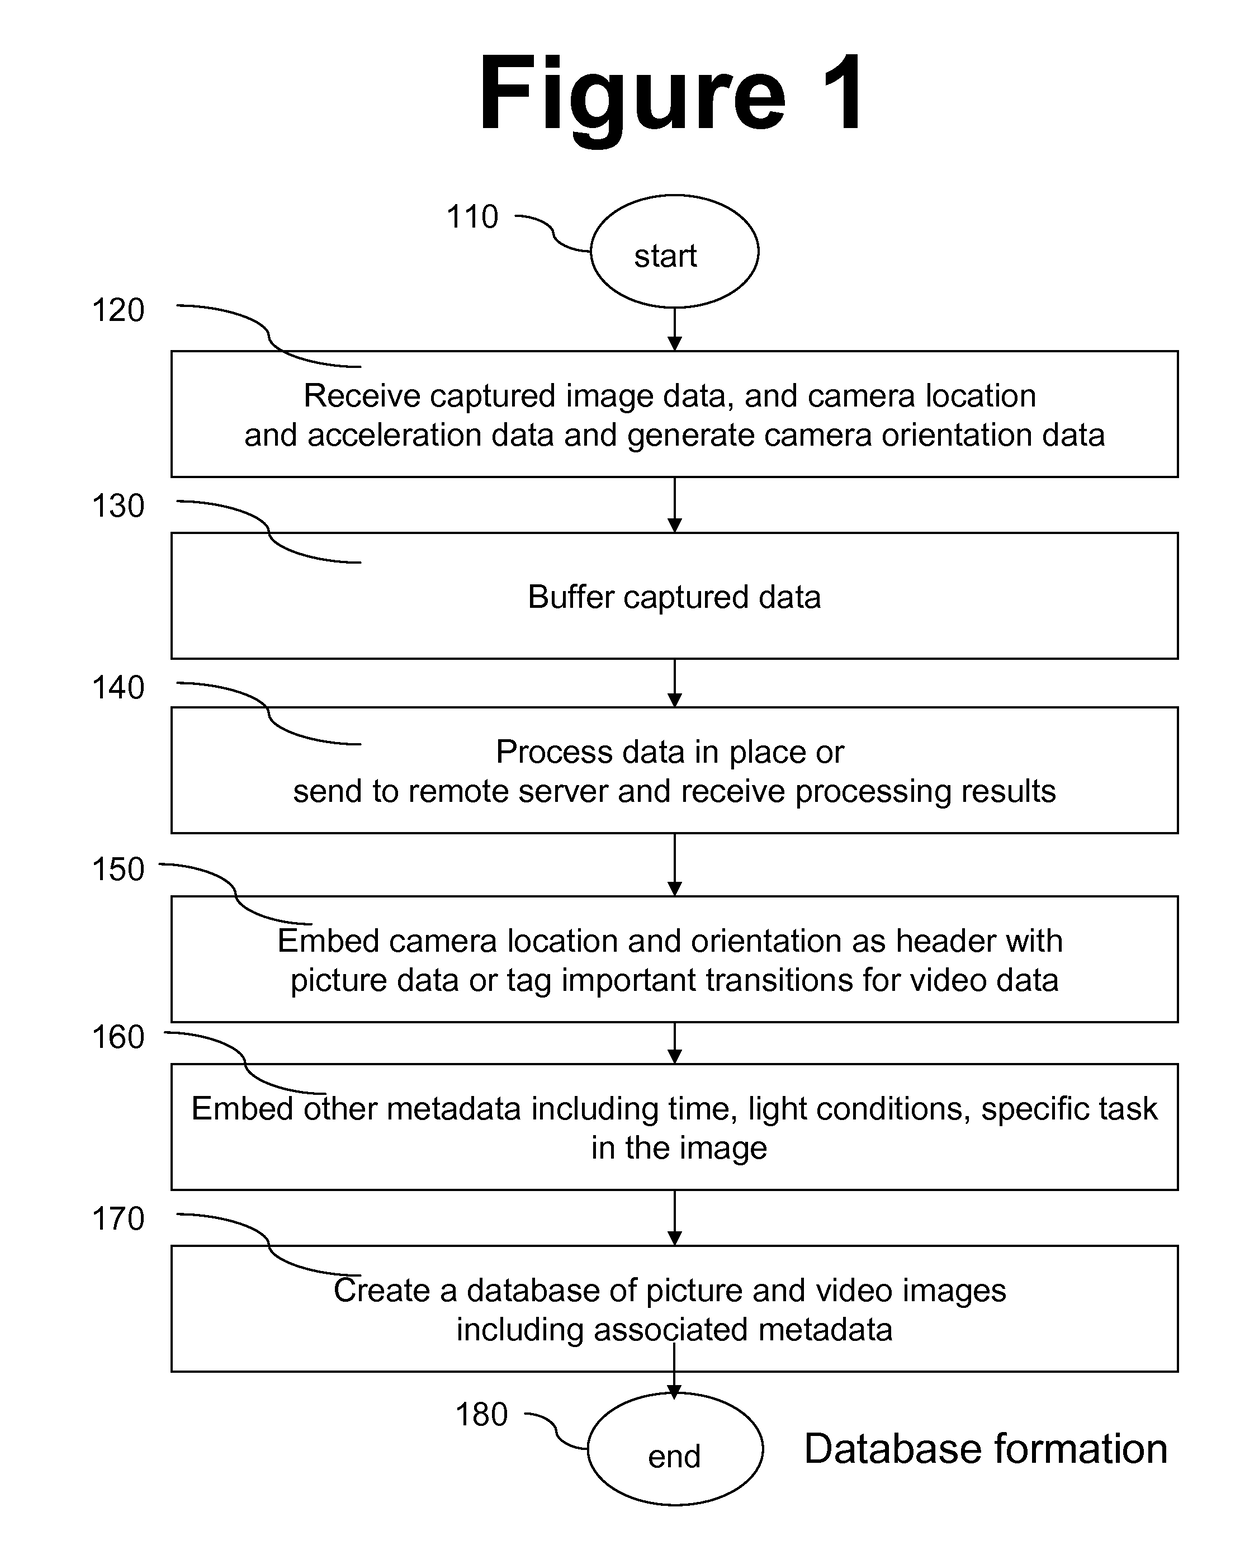 Image matching in support of mobile navigation